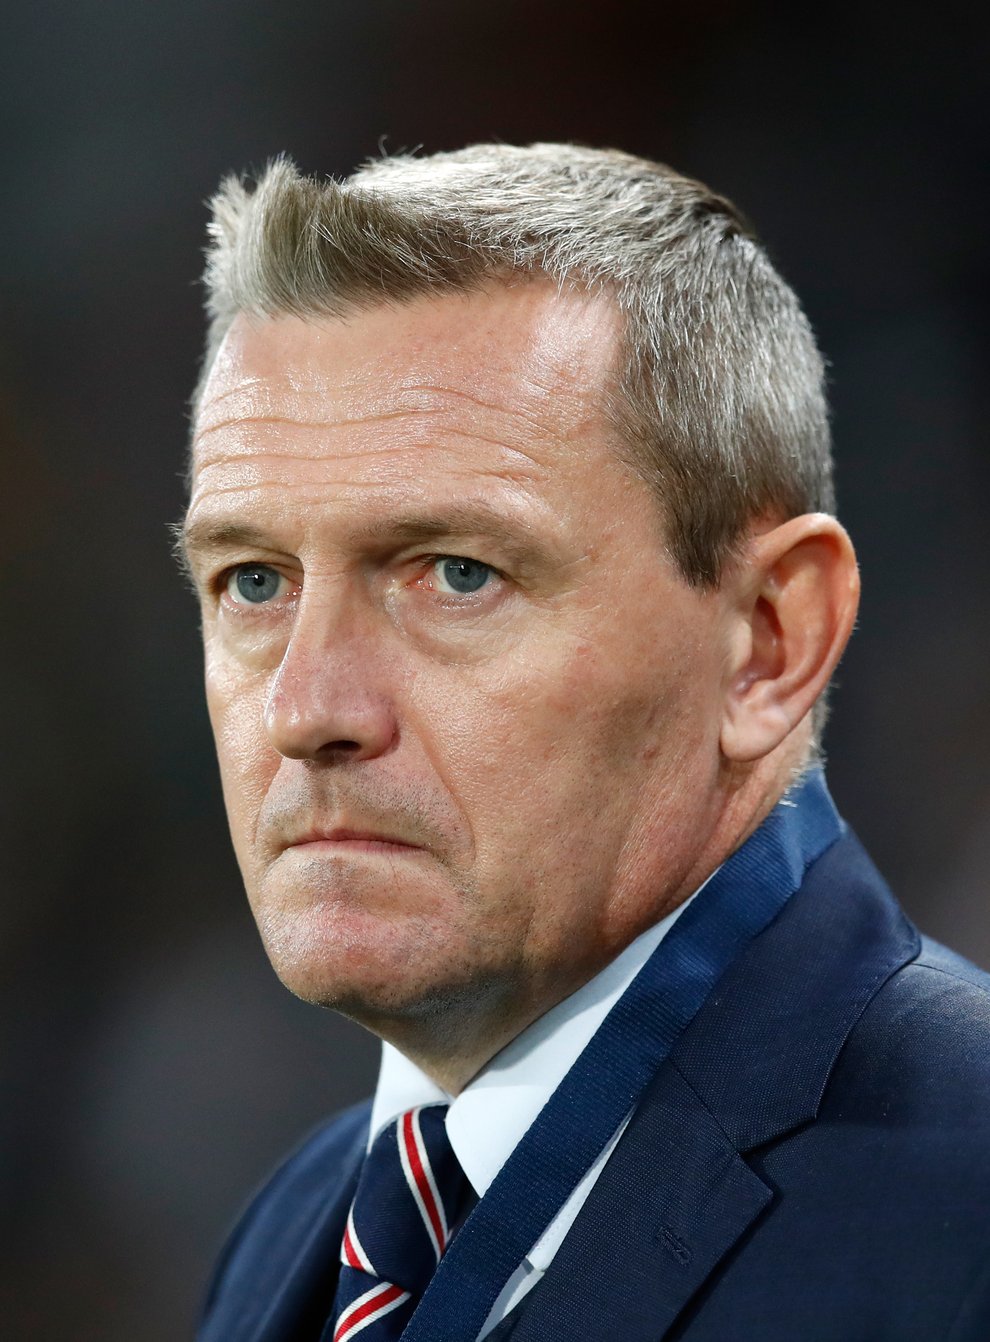 England under-21 coach Aidy Boothroyd was "surprised and disappointed" by the actions of his former squad members Phil Foden and Mason Greenwood